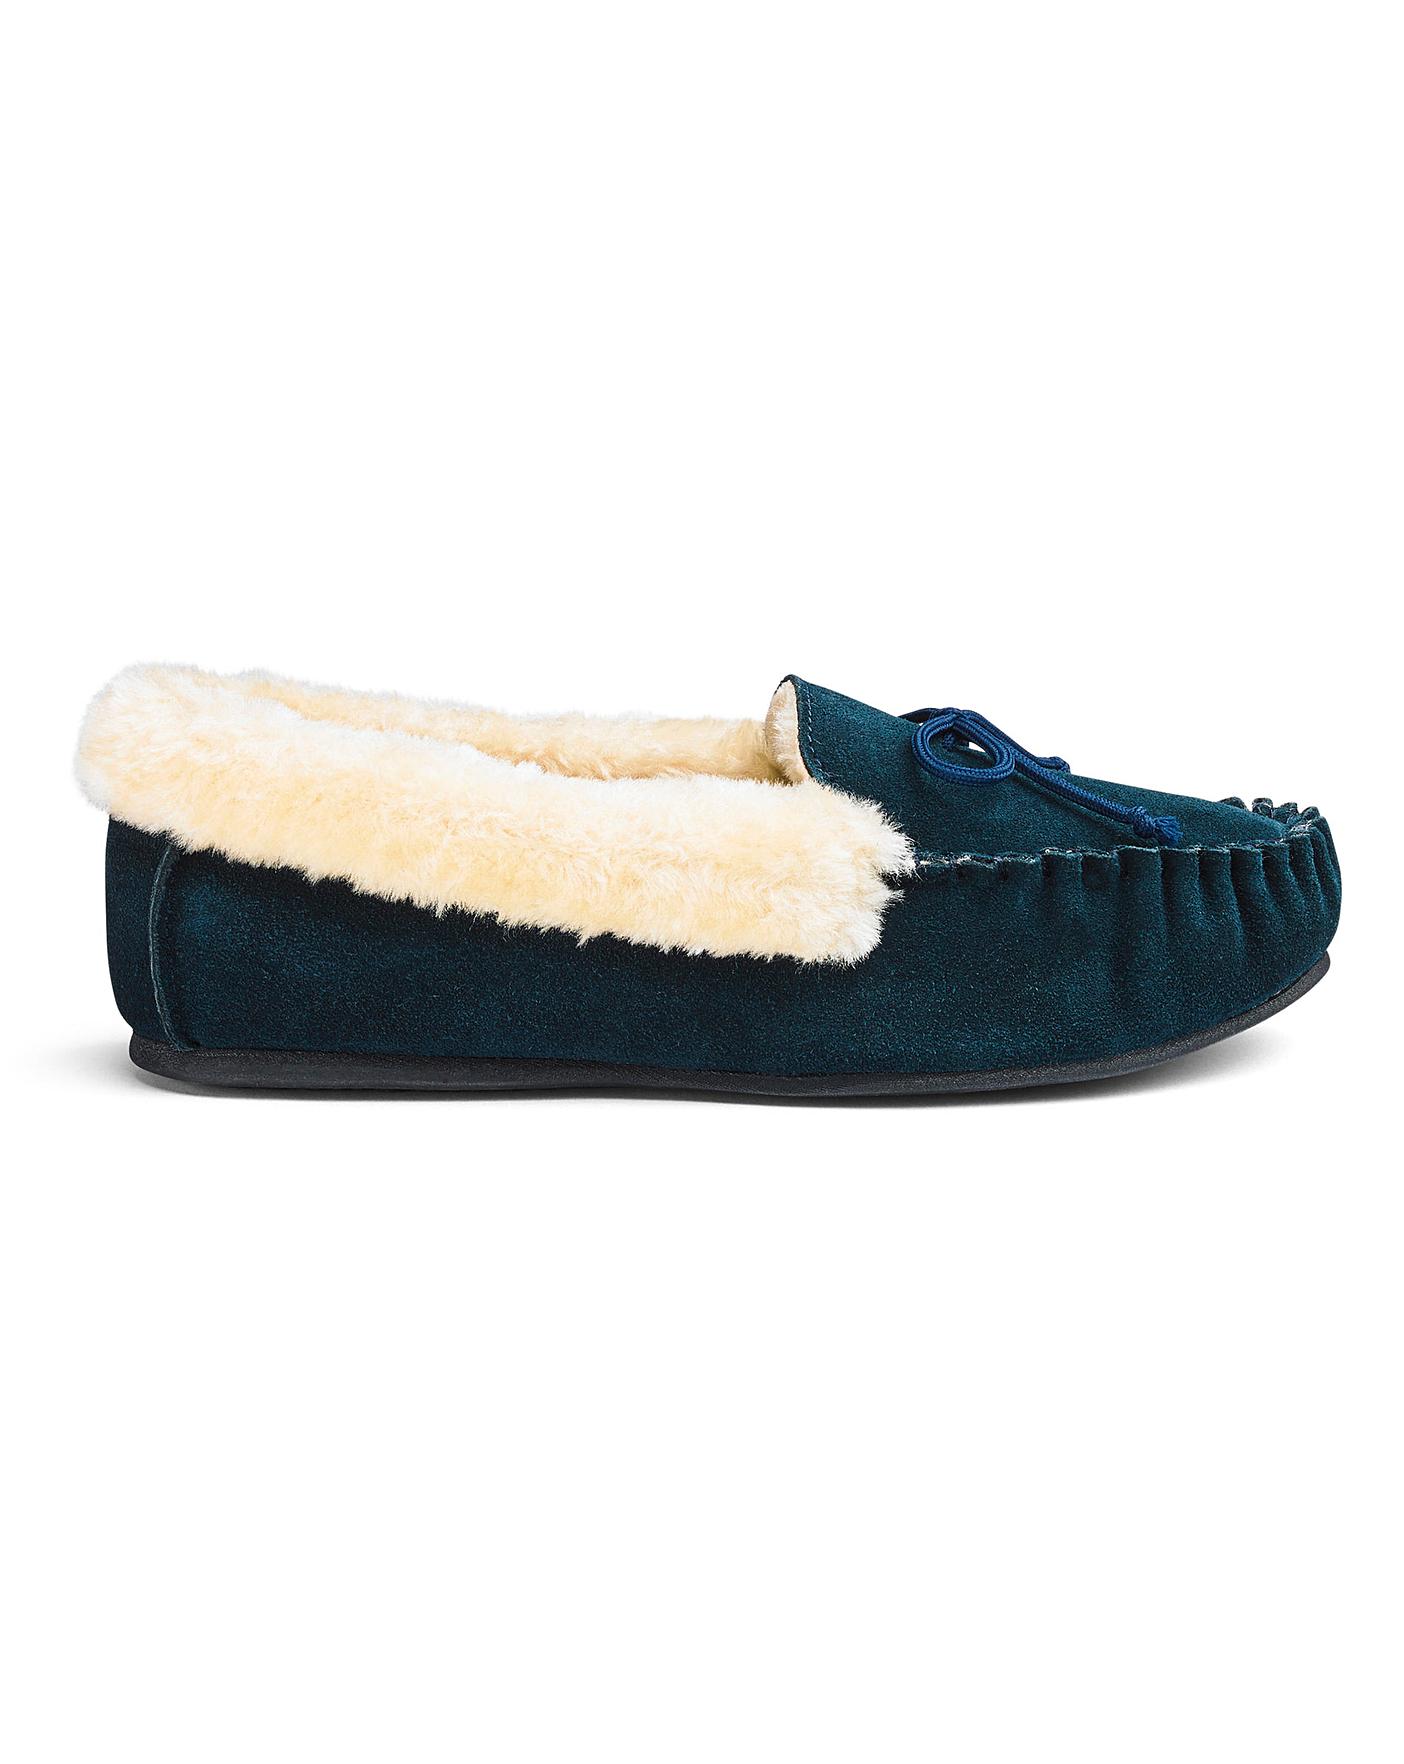 personalised moccasin slippers